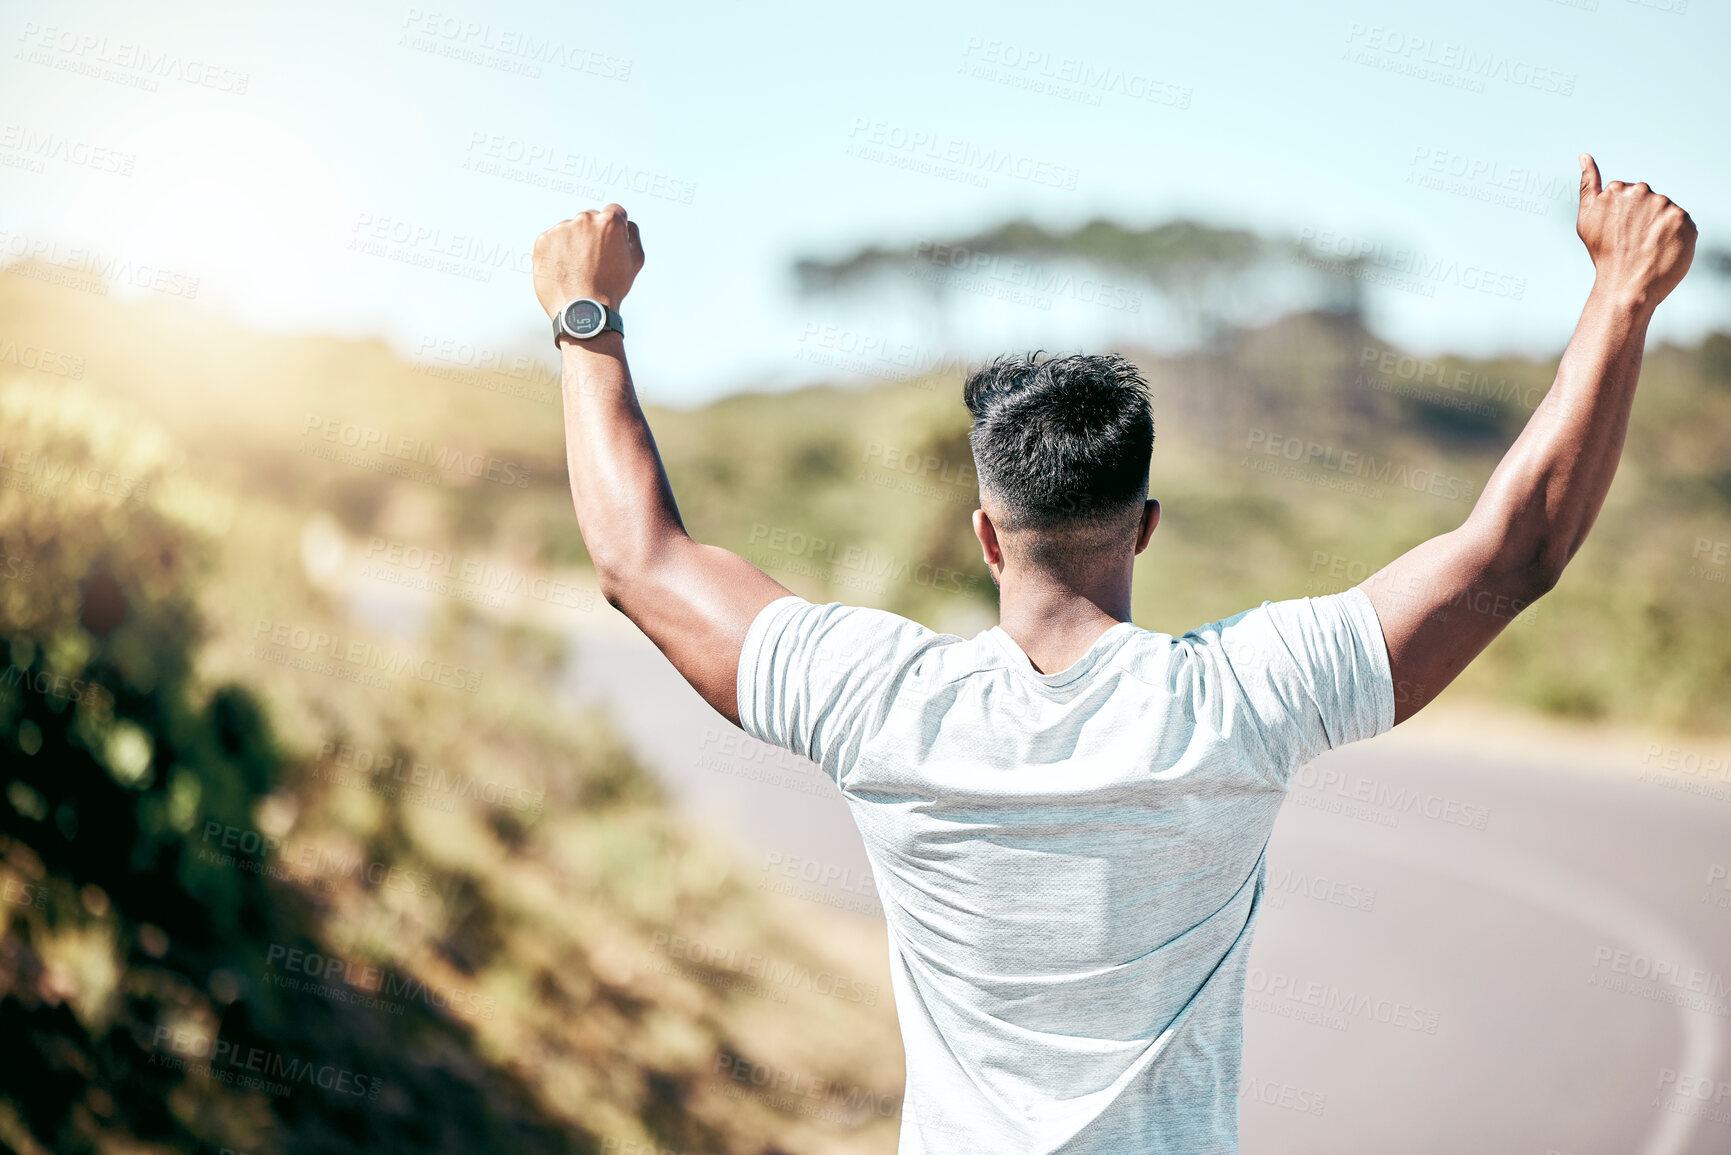 Buy stock photo Rearview fit mixed race man celebrating a victory with his arms raised. Athletic male feeling overjoyed and cheerful after a win. Finding success with hardwork and dedication to health and fitness